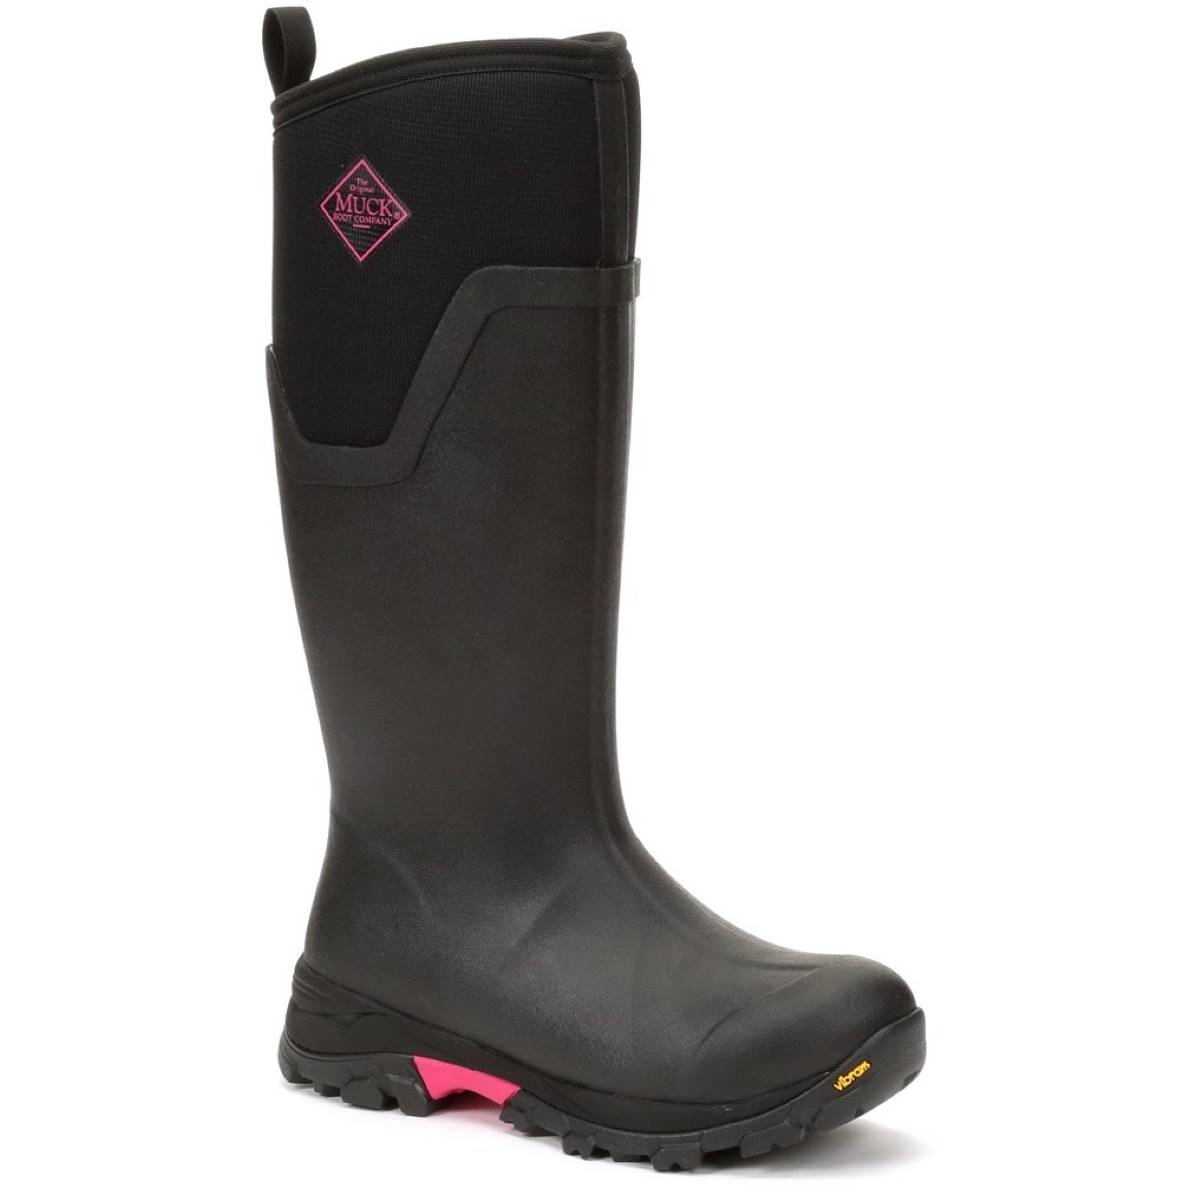 Muck Boots Arctic Ice Tall Agat Black pink Womens Wellingtons ASVTA-404 in a Plain Rubber in Size 4